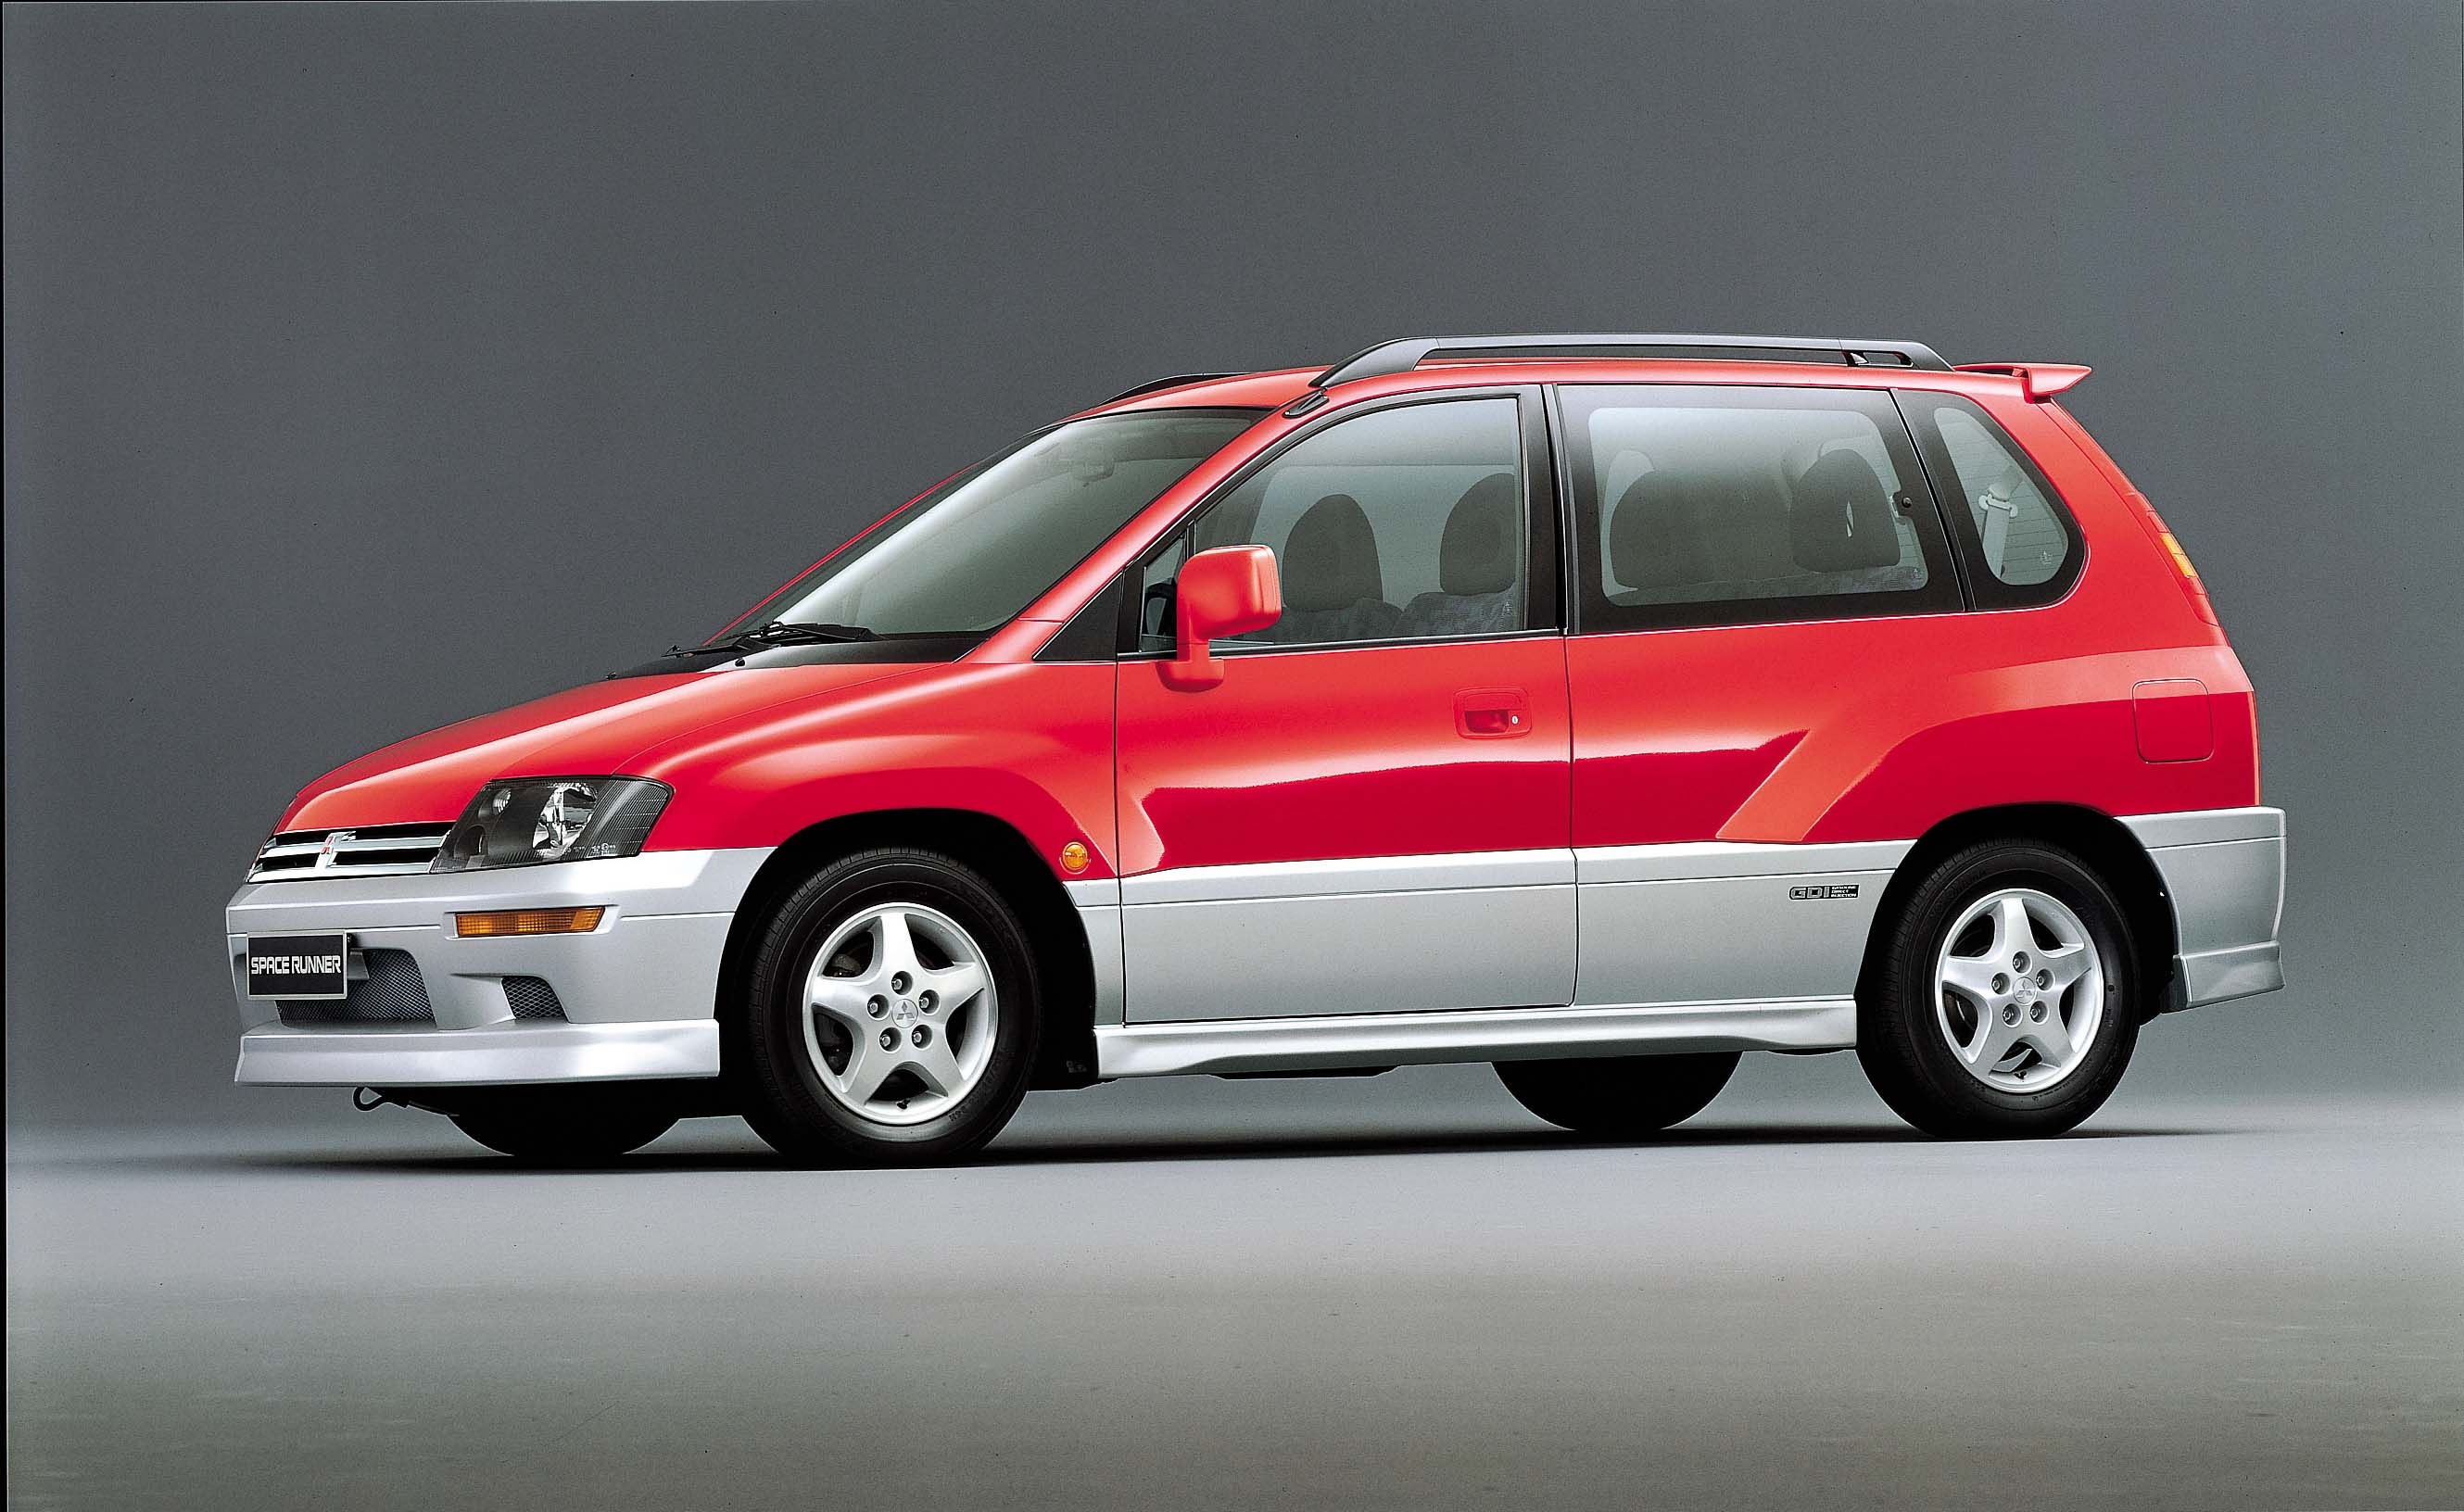 Mitsubishi Space Runner technical details, history, photos